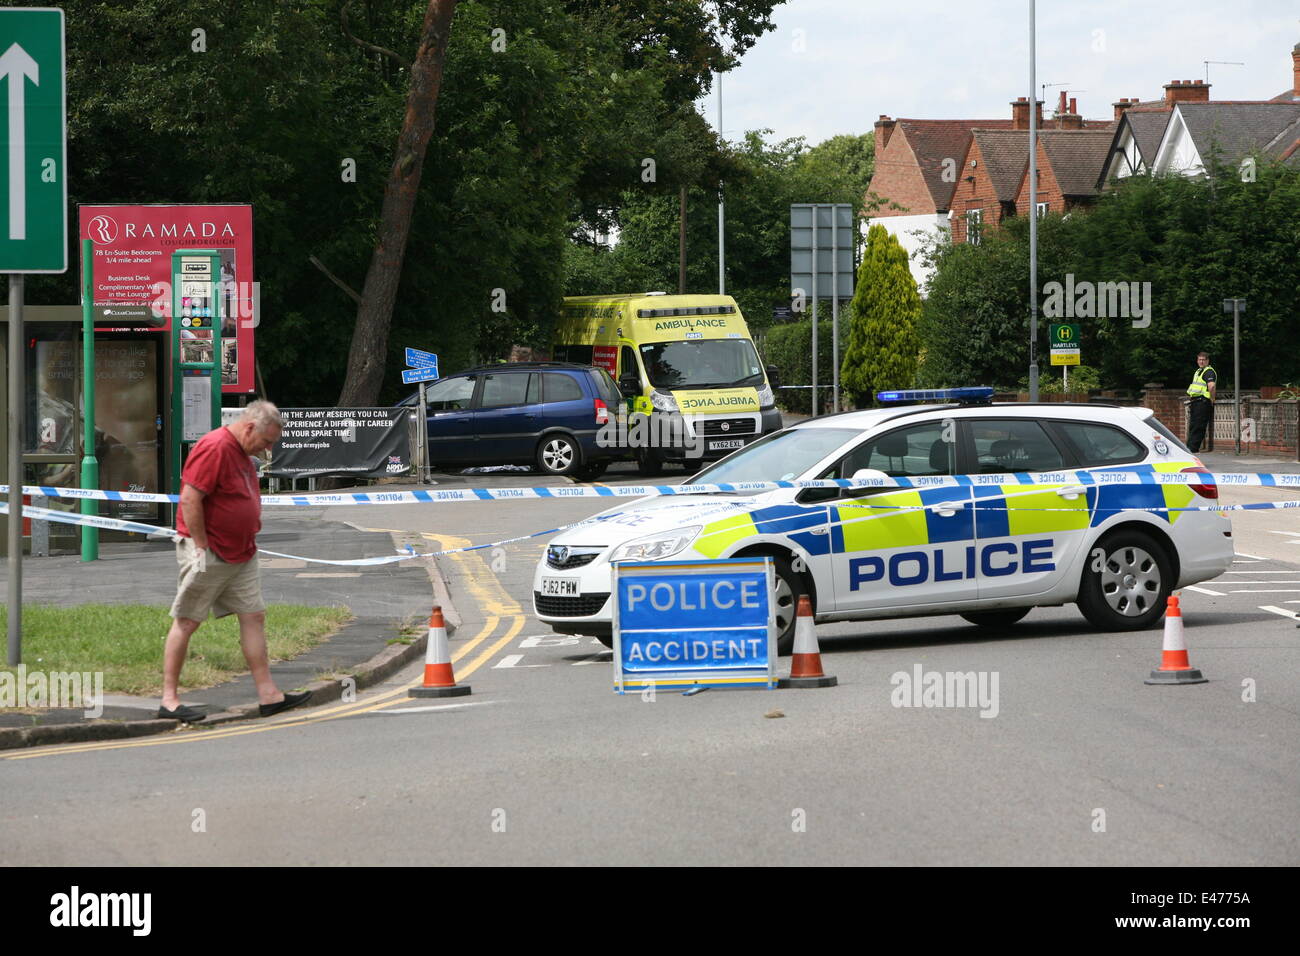 Loughborough, Leicestershire, UK. 4th July, 2014. Car accident on the a6 leicester road police traffic officers and paramedics attended the scene. Stock Photo